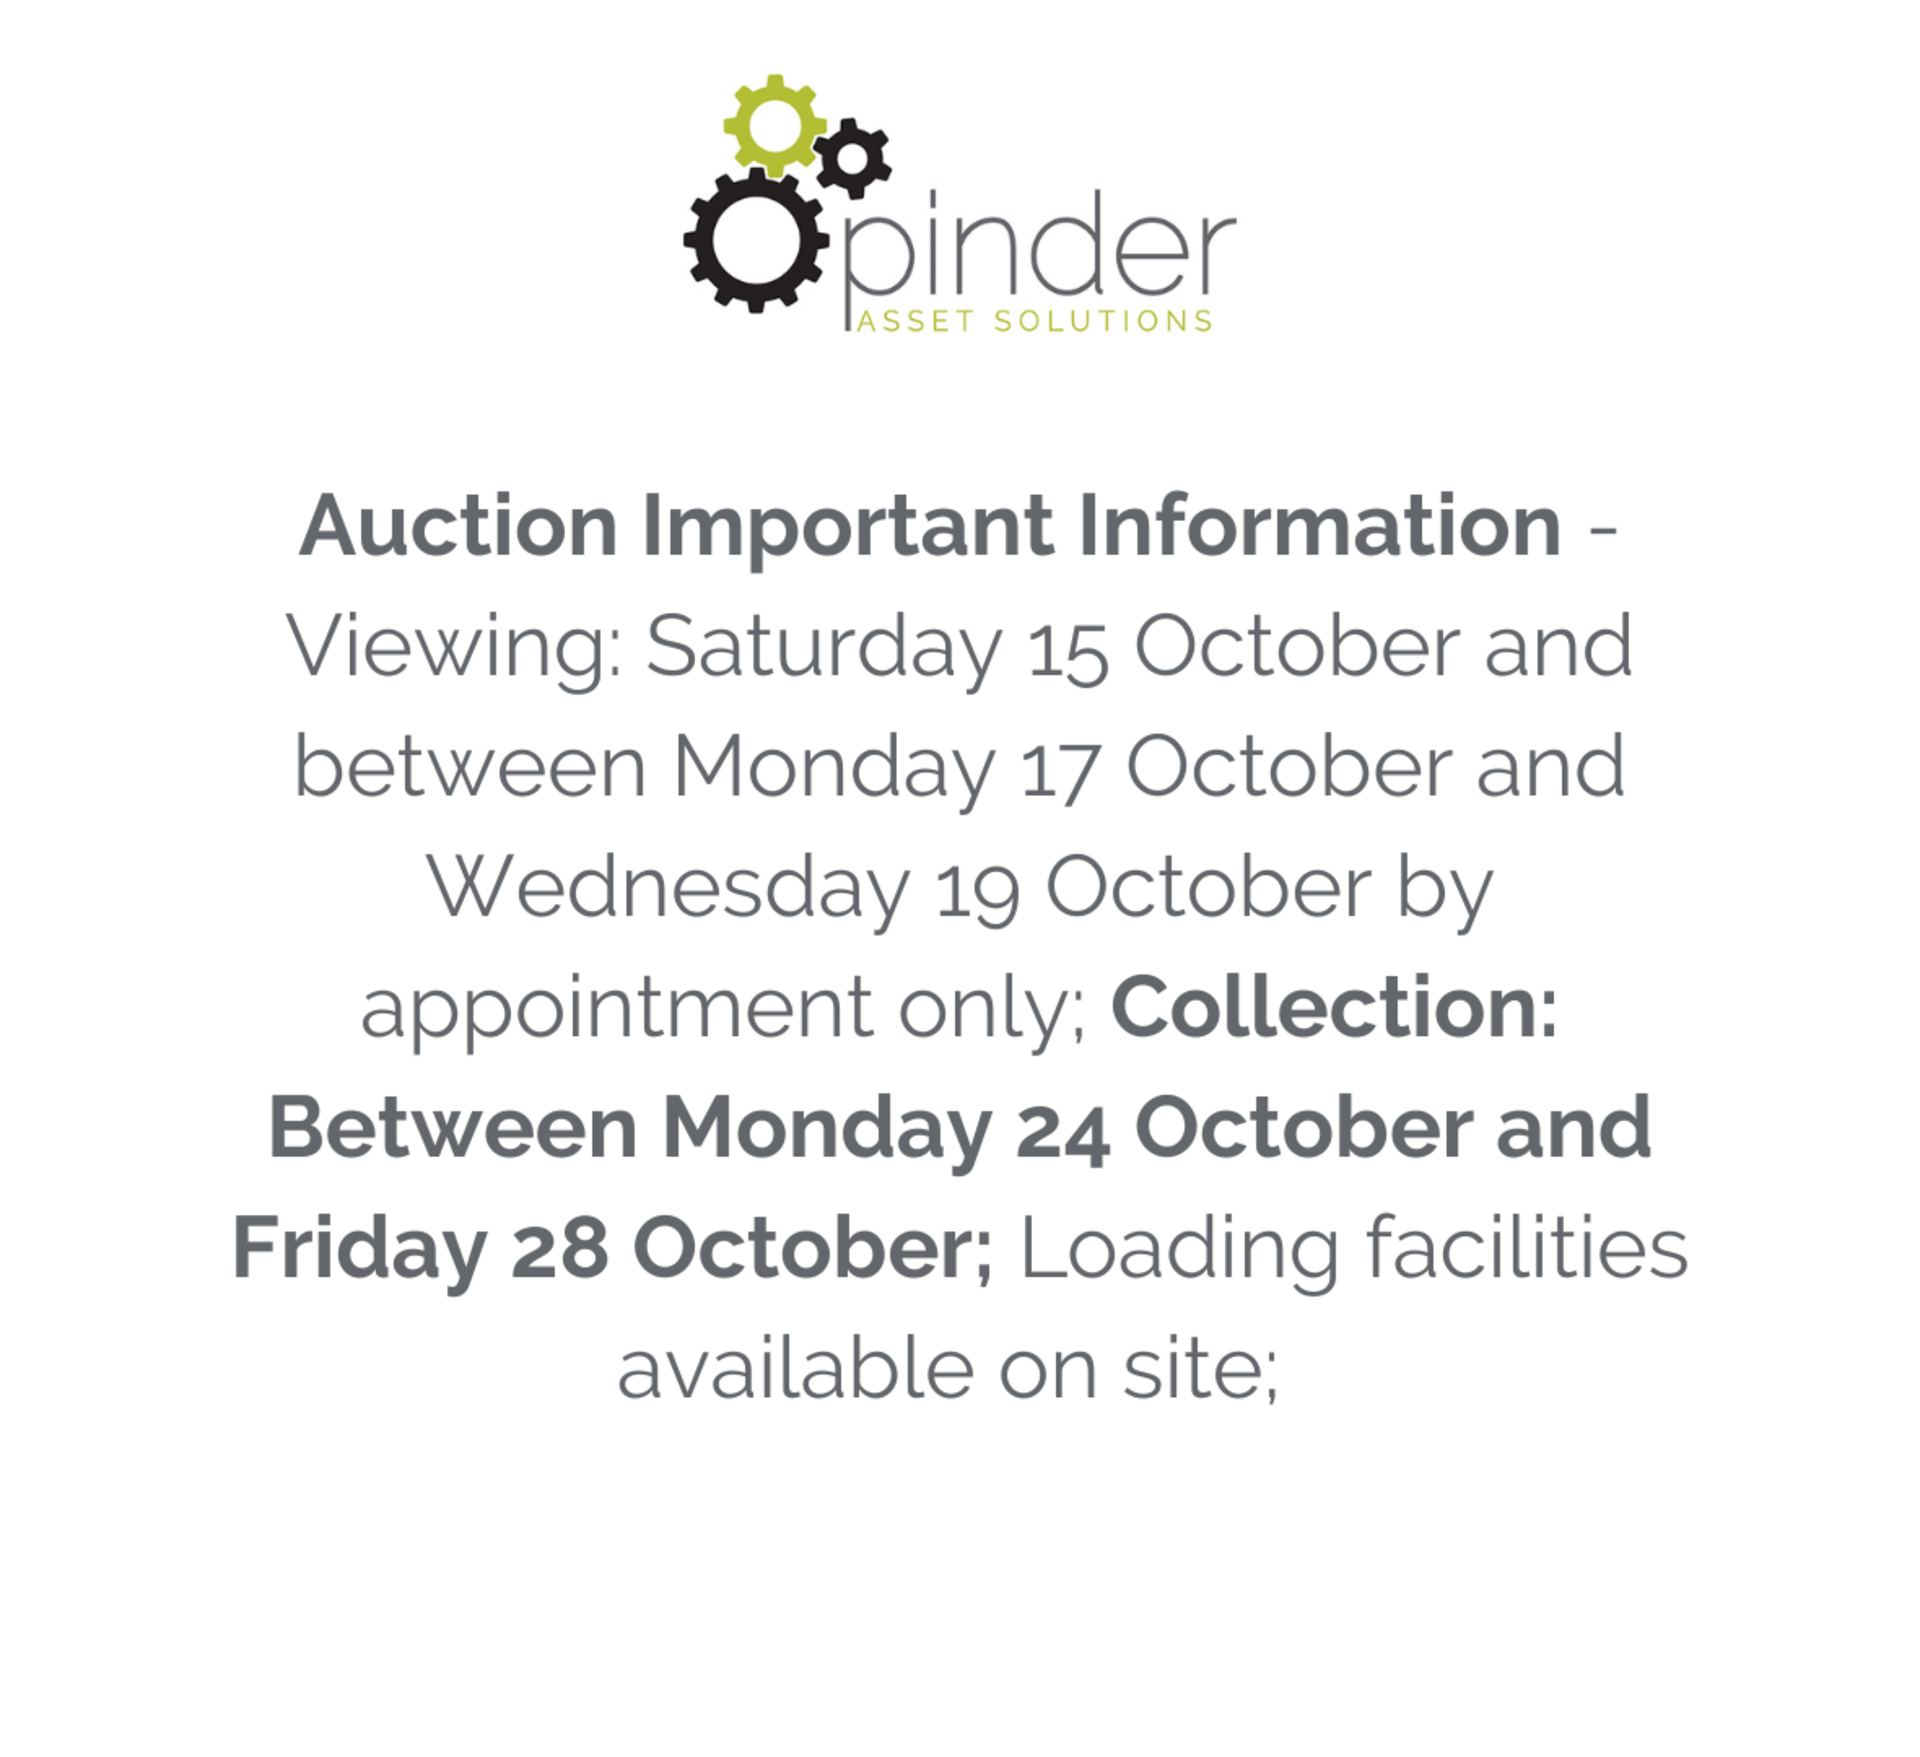 Auction Important Information - Viewing: Saturday 15 October 2022, and between Monday 17 October